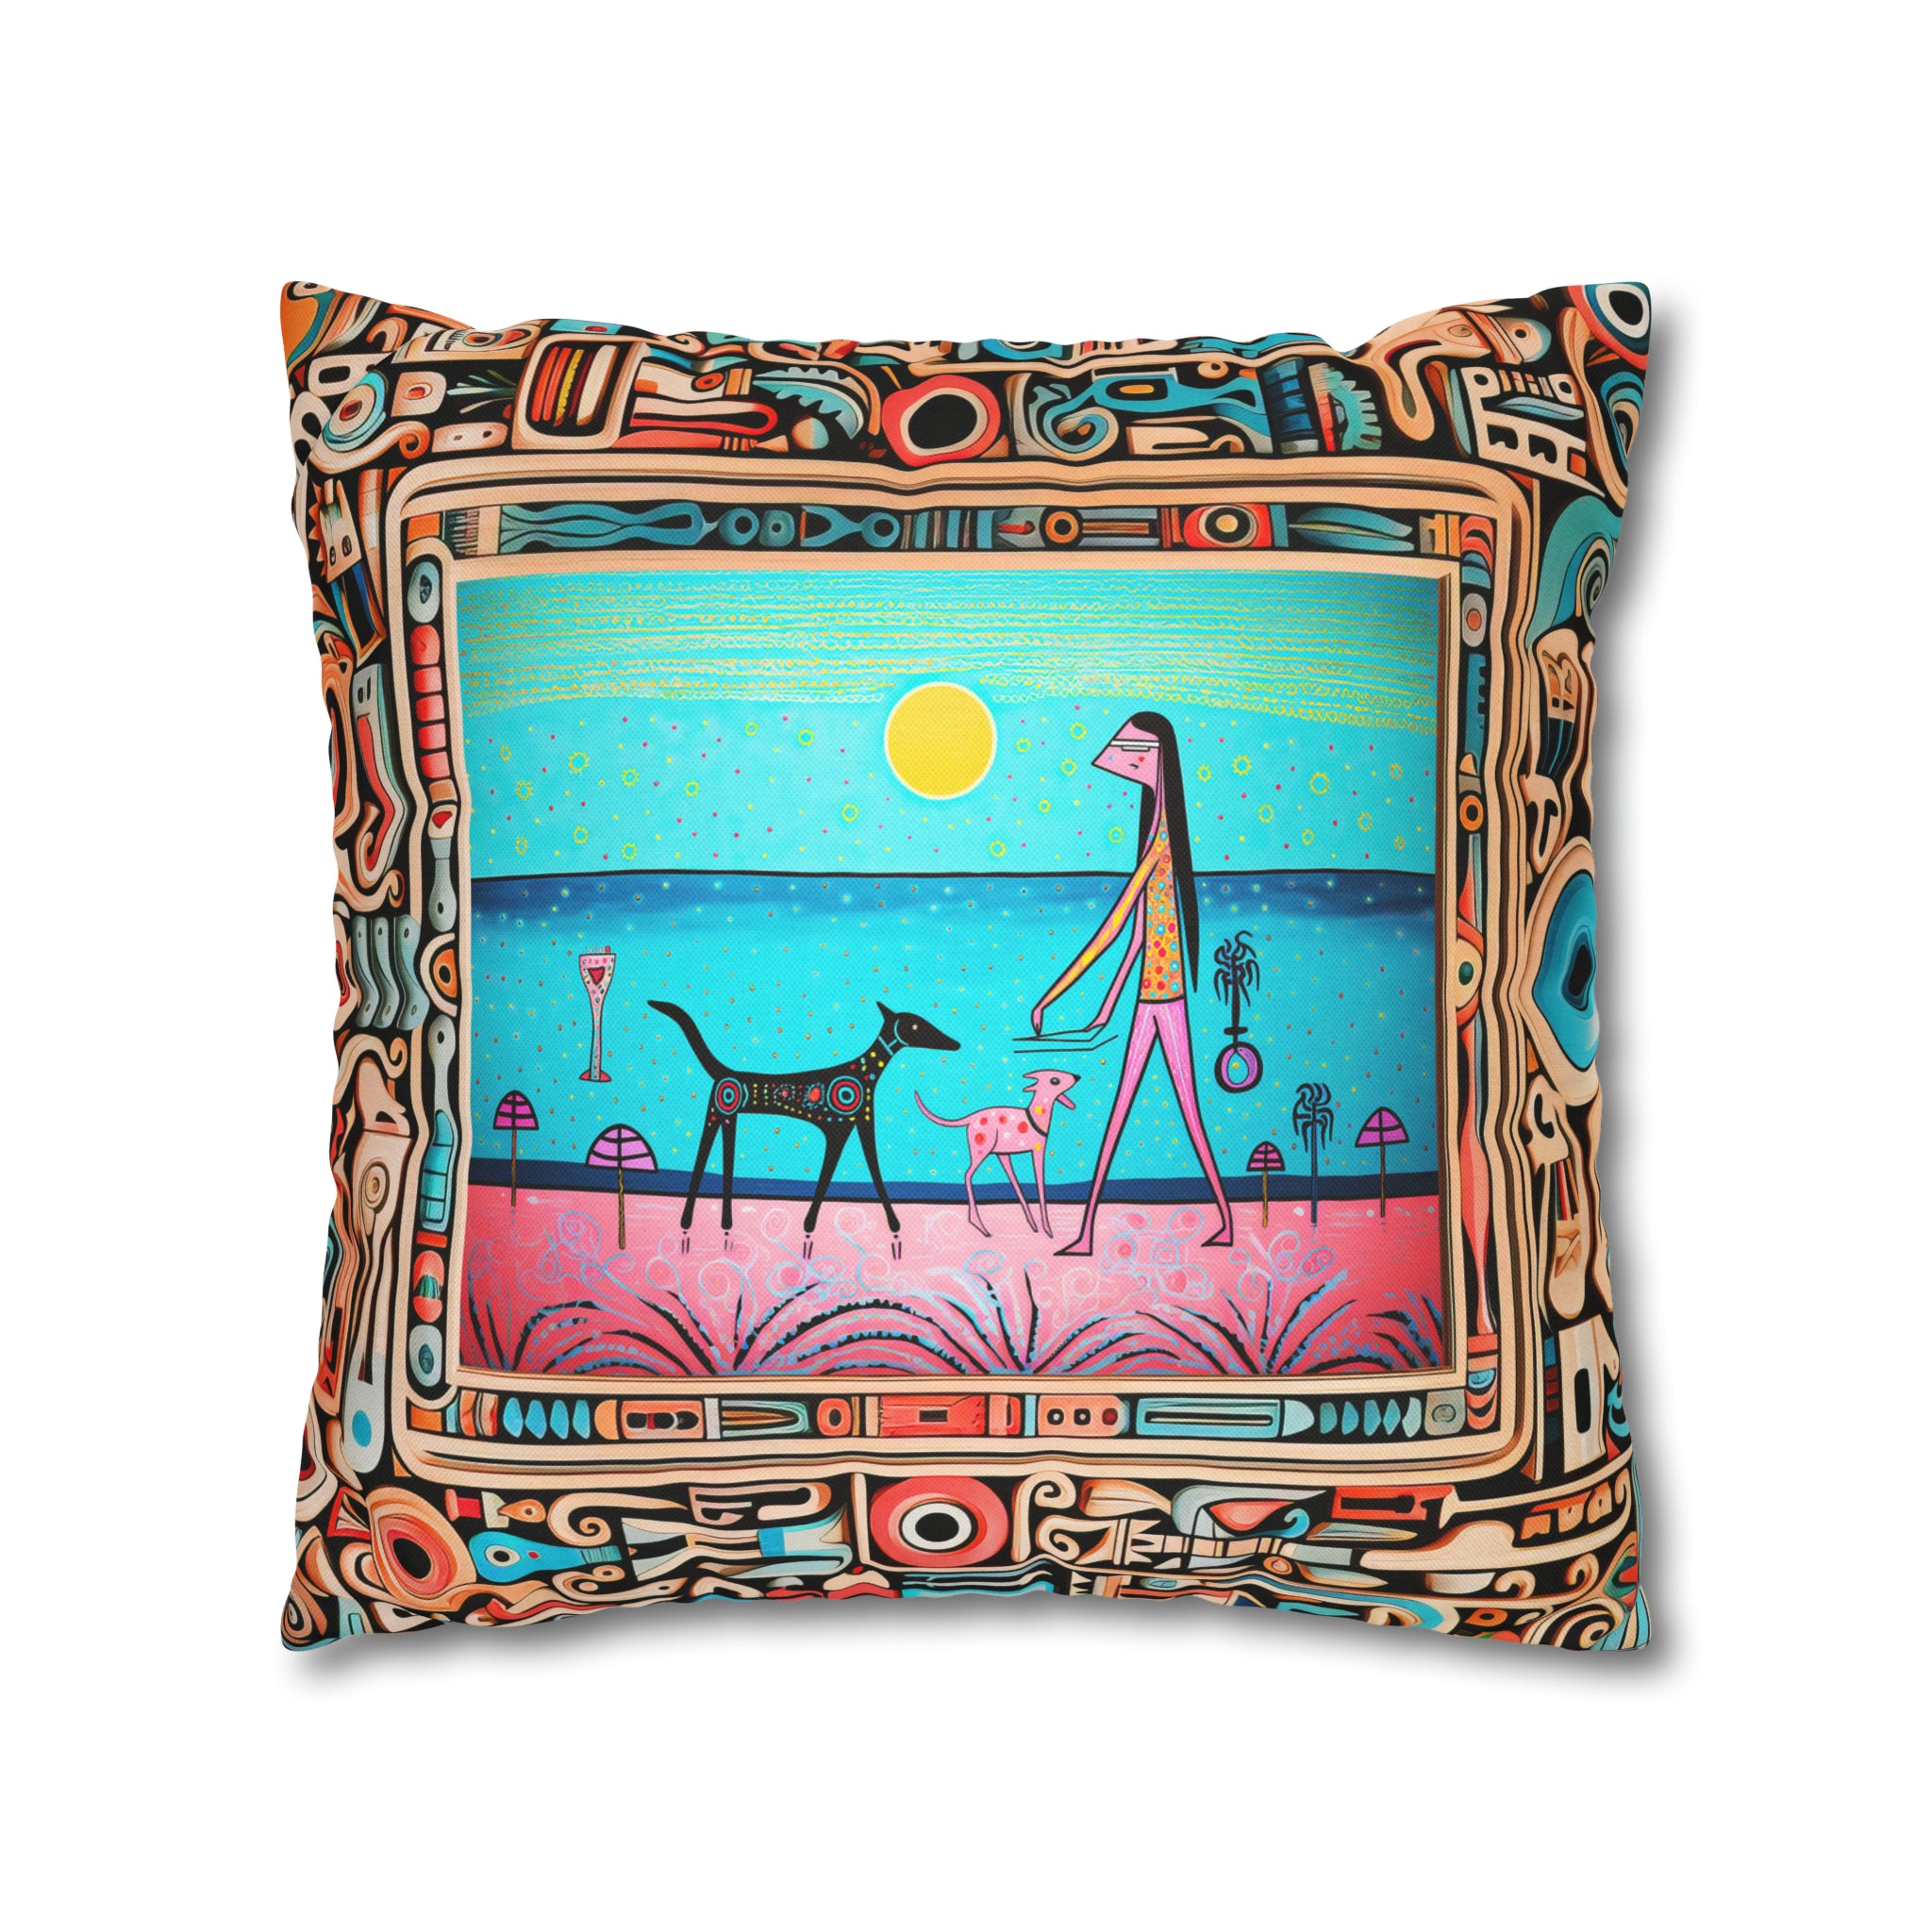 Square Pillow Case 18" x 18", CASE ONLY, no pillow form, original Pop Art Style, Alien Walking Her Dog on Mars, in a Frame